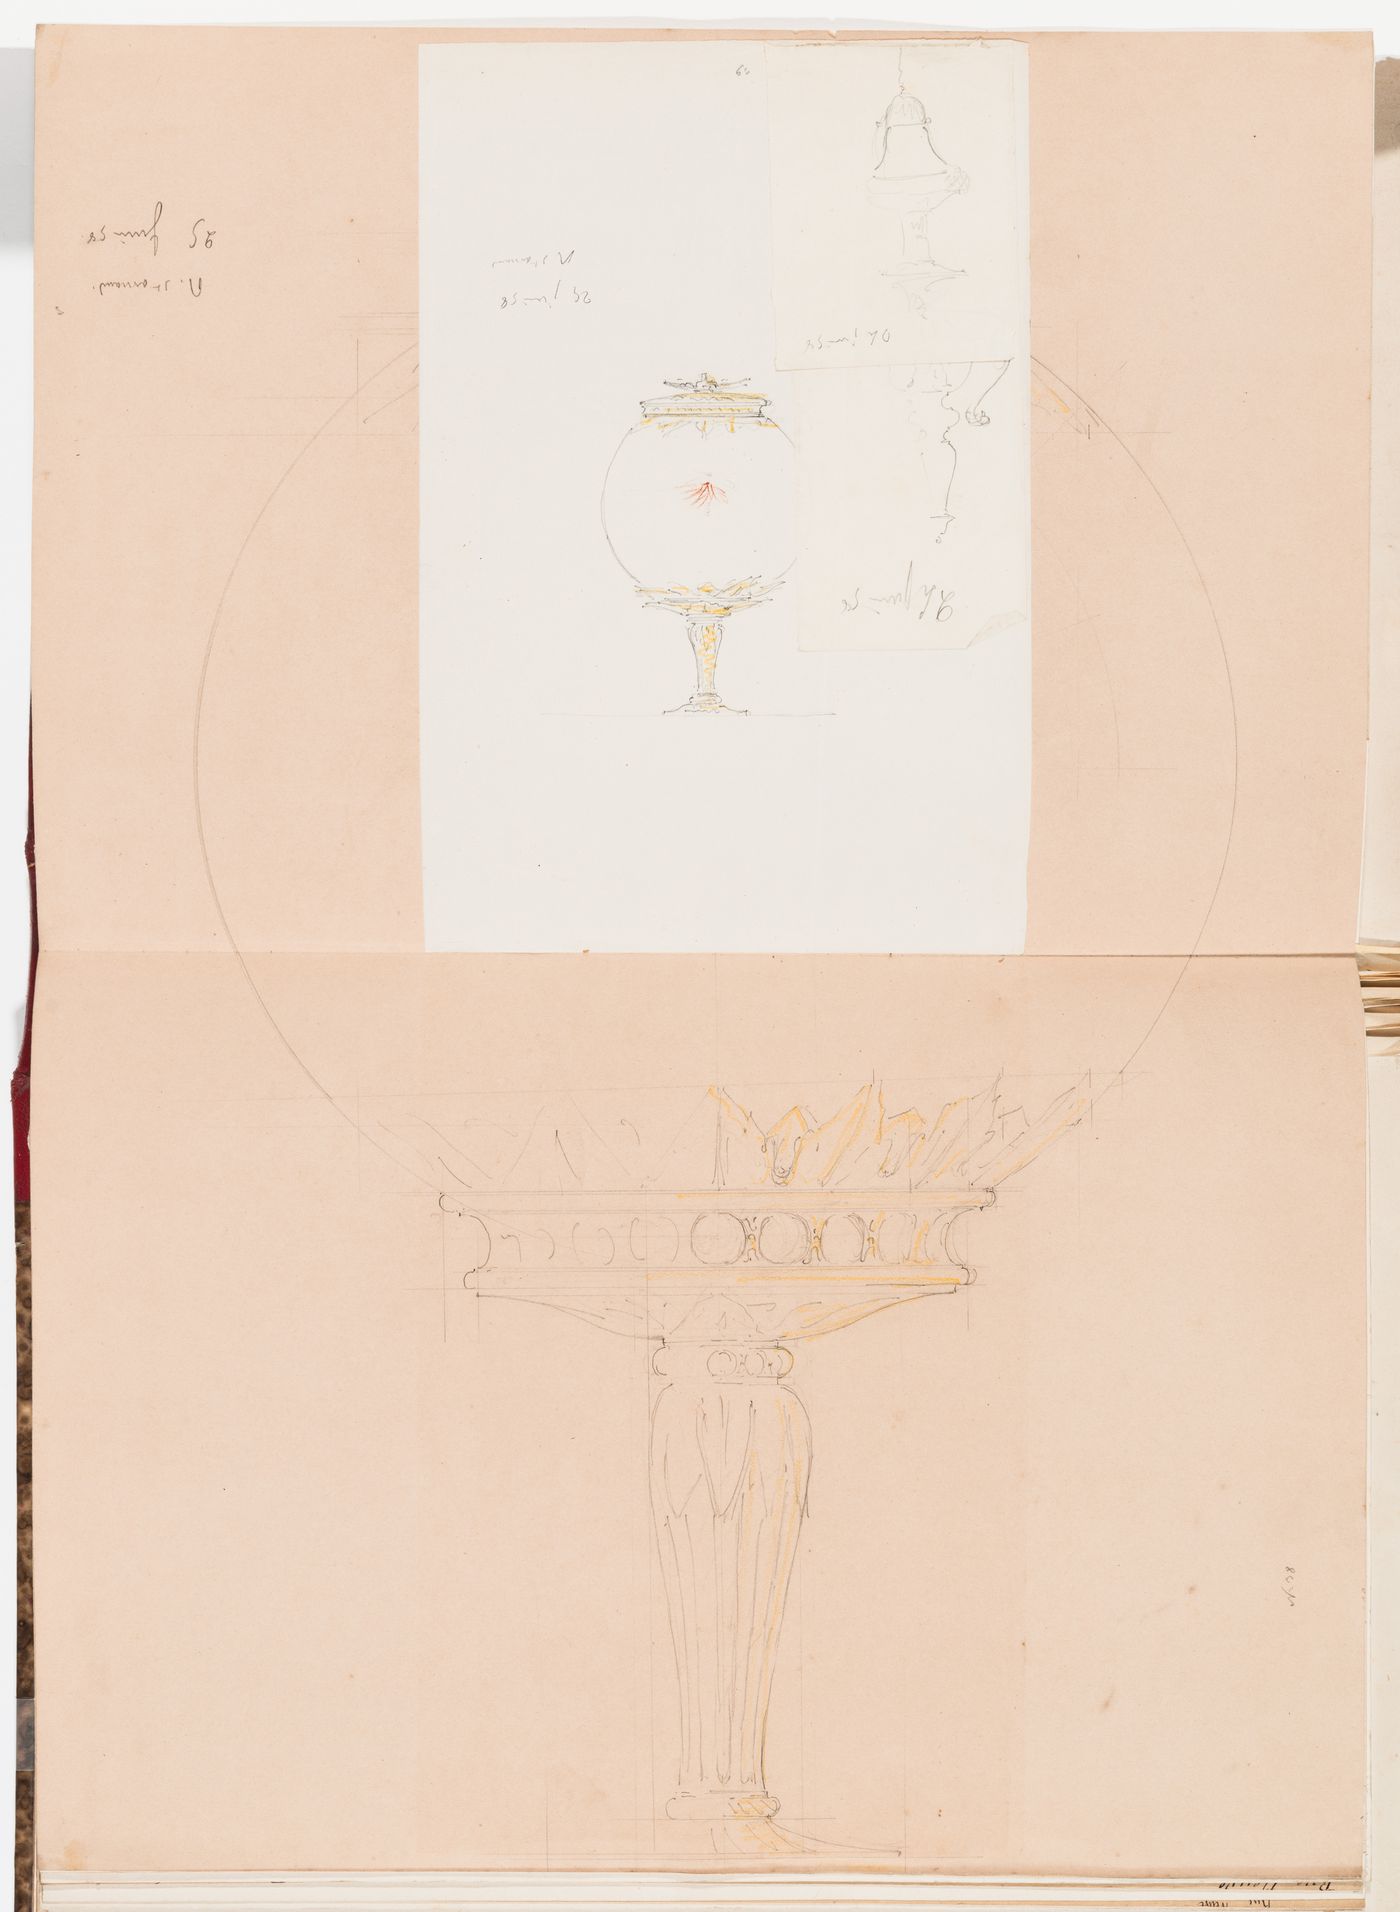 Sketches for a lantern for the porte cochere, Hôtel Soltykoff